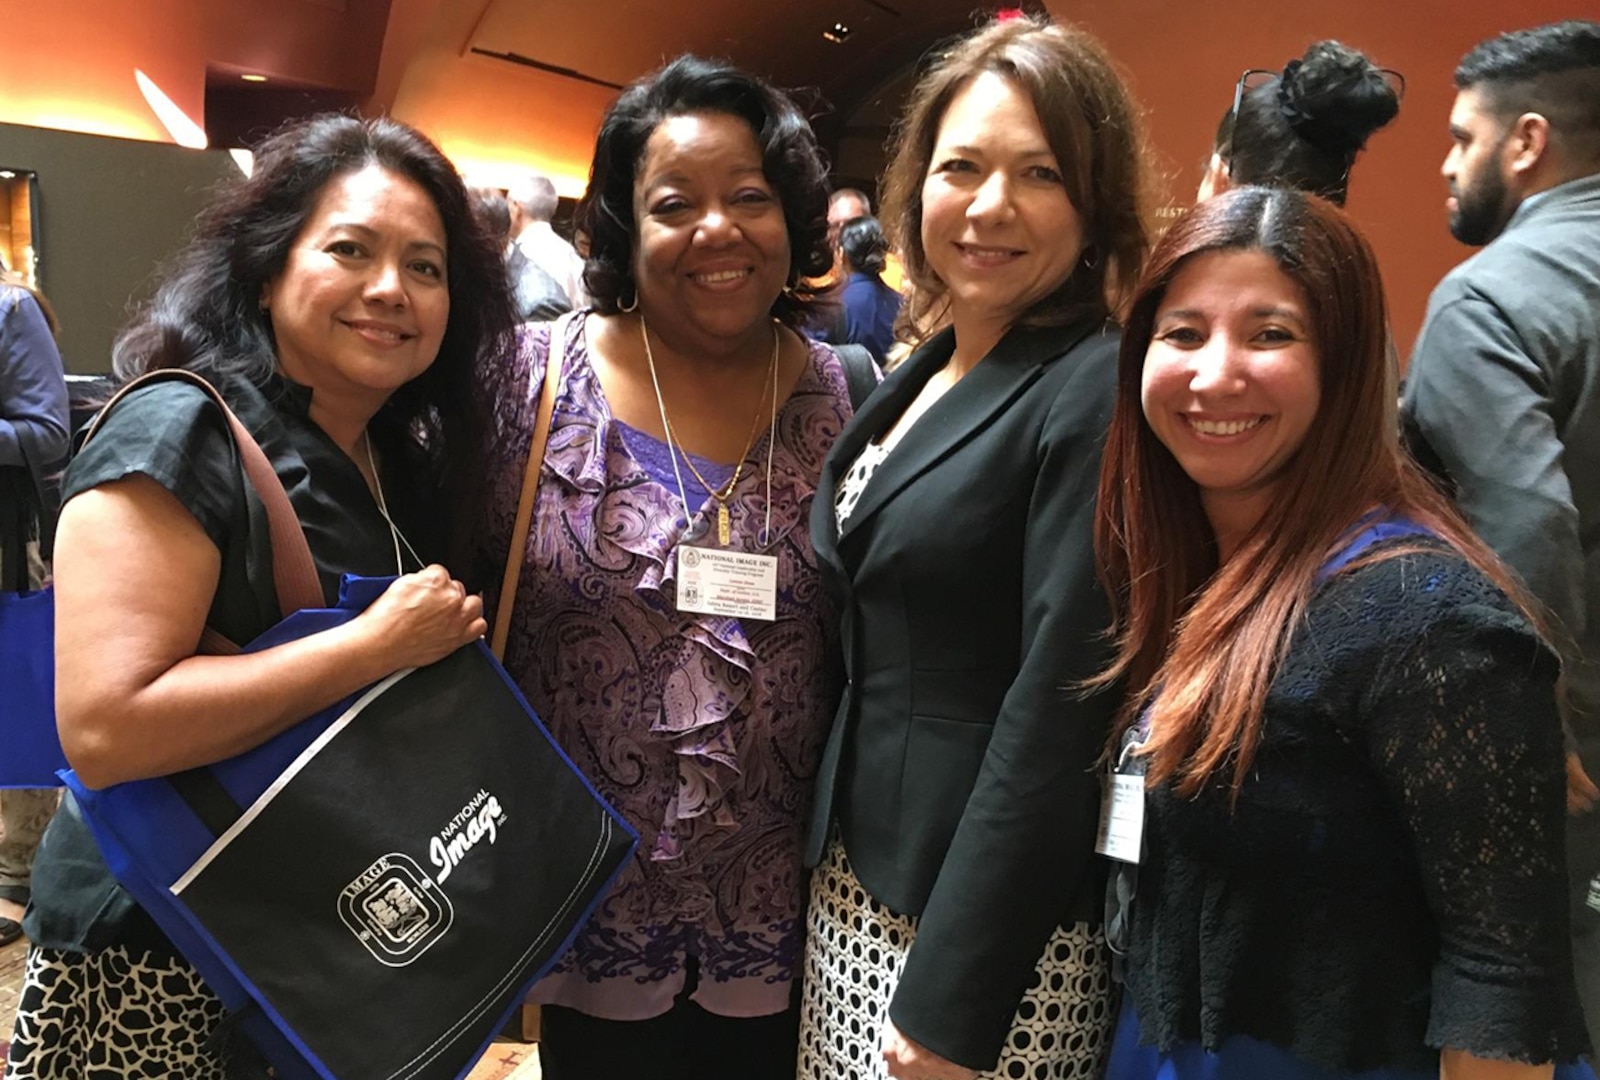 The 44th Annual Federal Employees Leadership and Diversity Training Program took place Sept. 12-16 in Albuquerque, N.M. From left: Dolores Mendoza-Azcurra and Lenora Shaw from the U.S. Marshals office, Dr. Zina Sutch, director of Office of Diversity and Inclusion for the Office of Personnel Management, and Mislin A. Hampton, DLA Land and Maritime Equal Employmnent Opportunity office. 